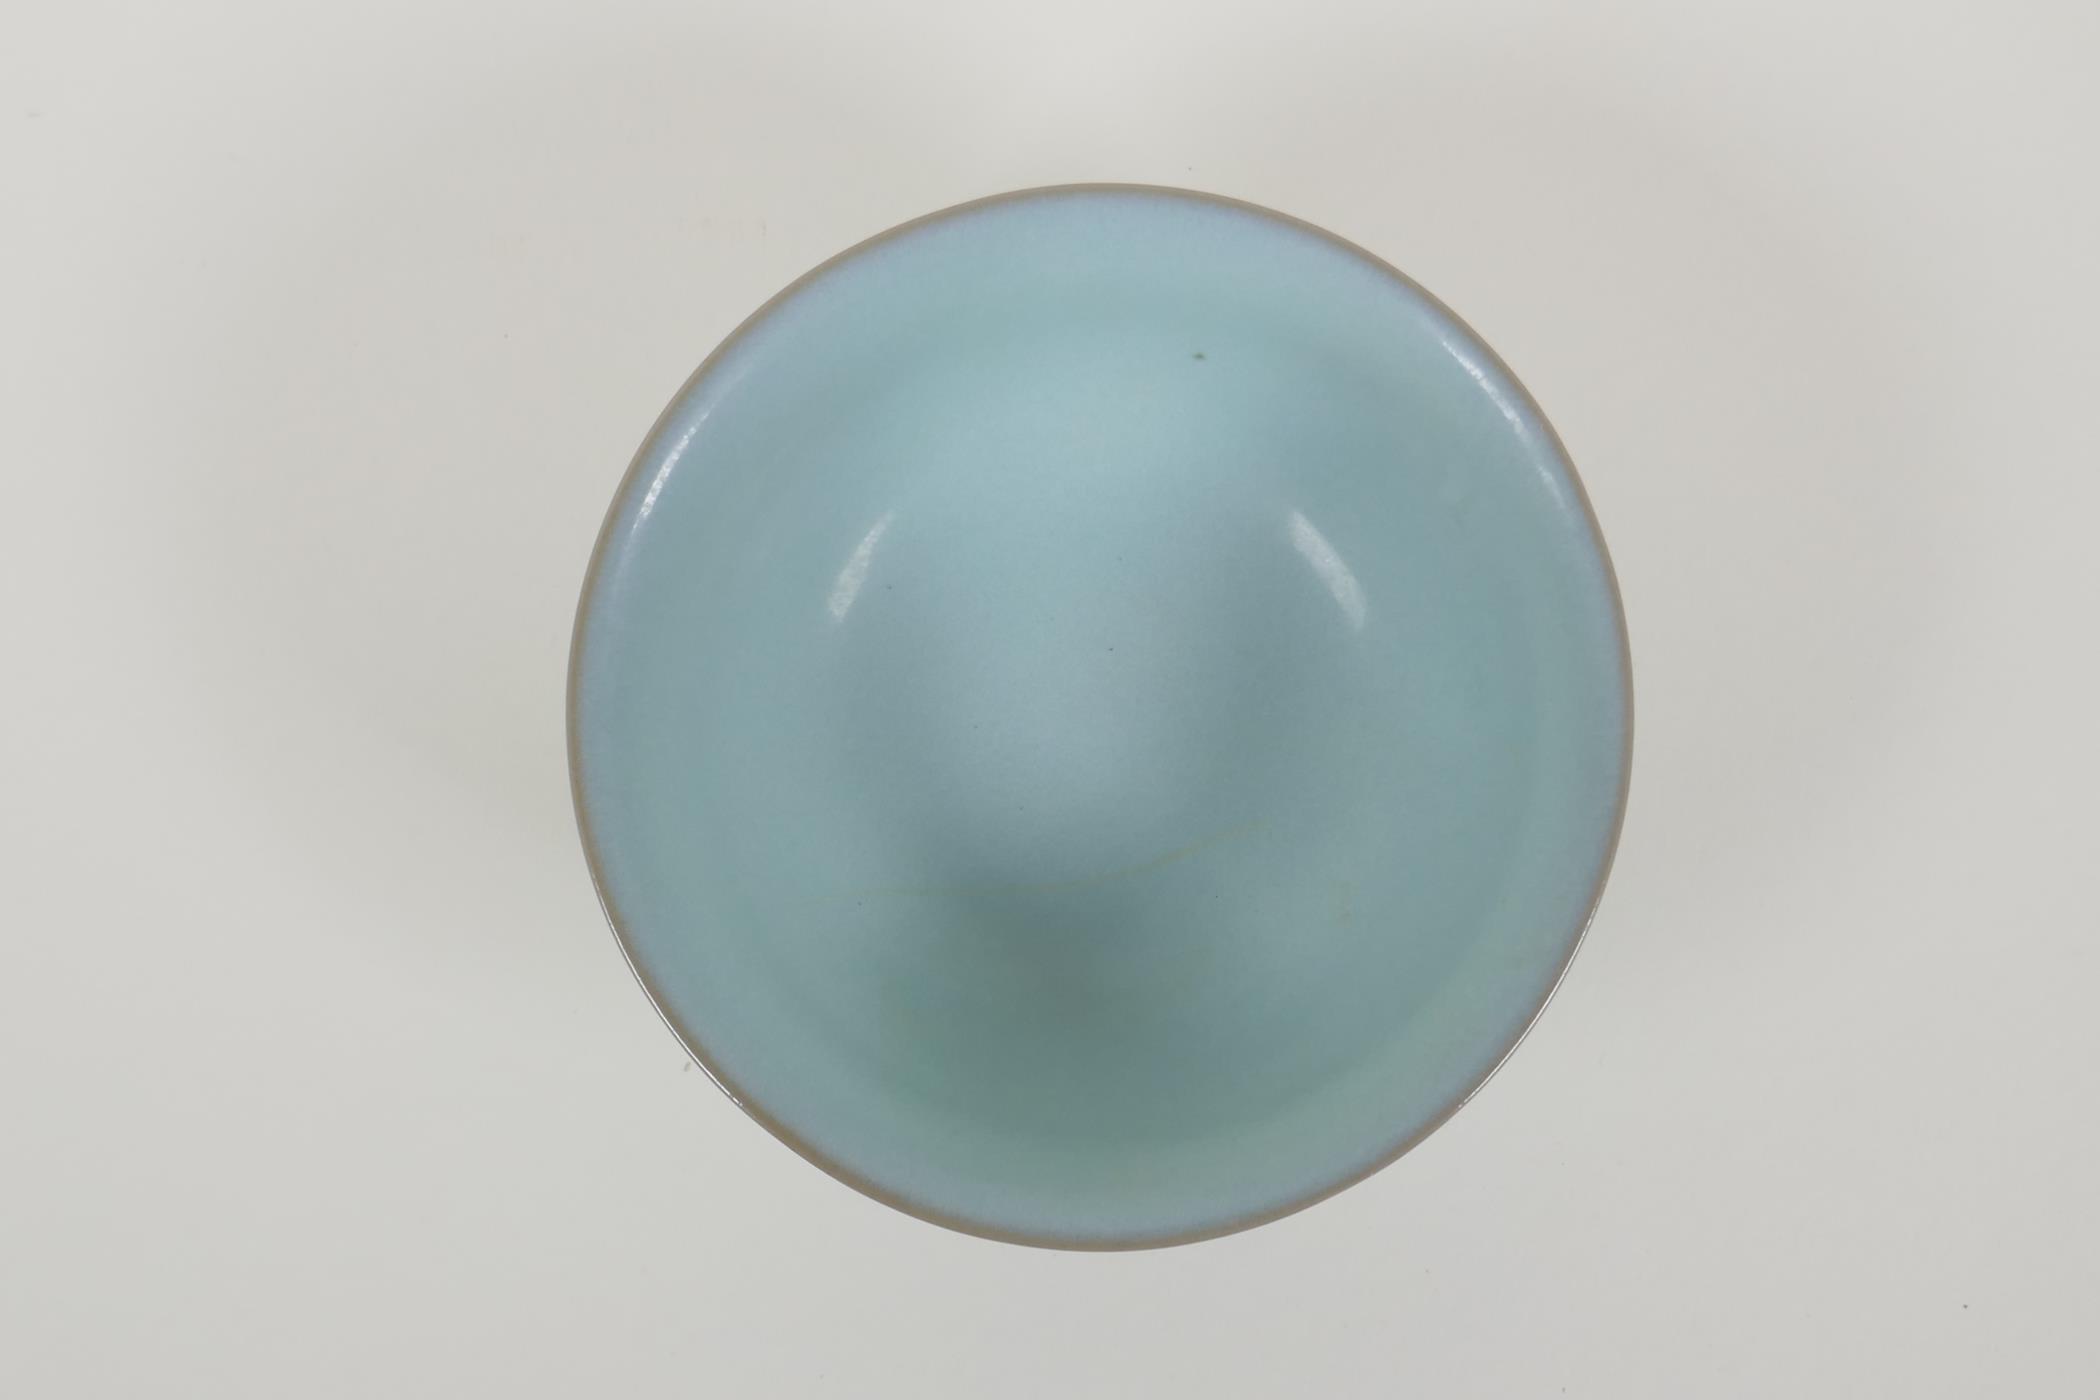 A Chinese celadon Ru ware style porcelain rice bowl, 5½" diameter - Image 4 of 6